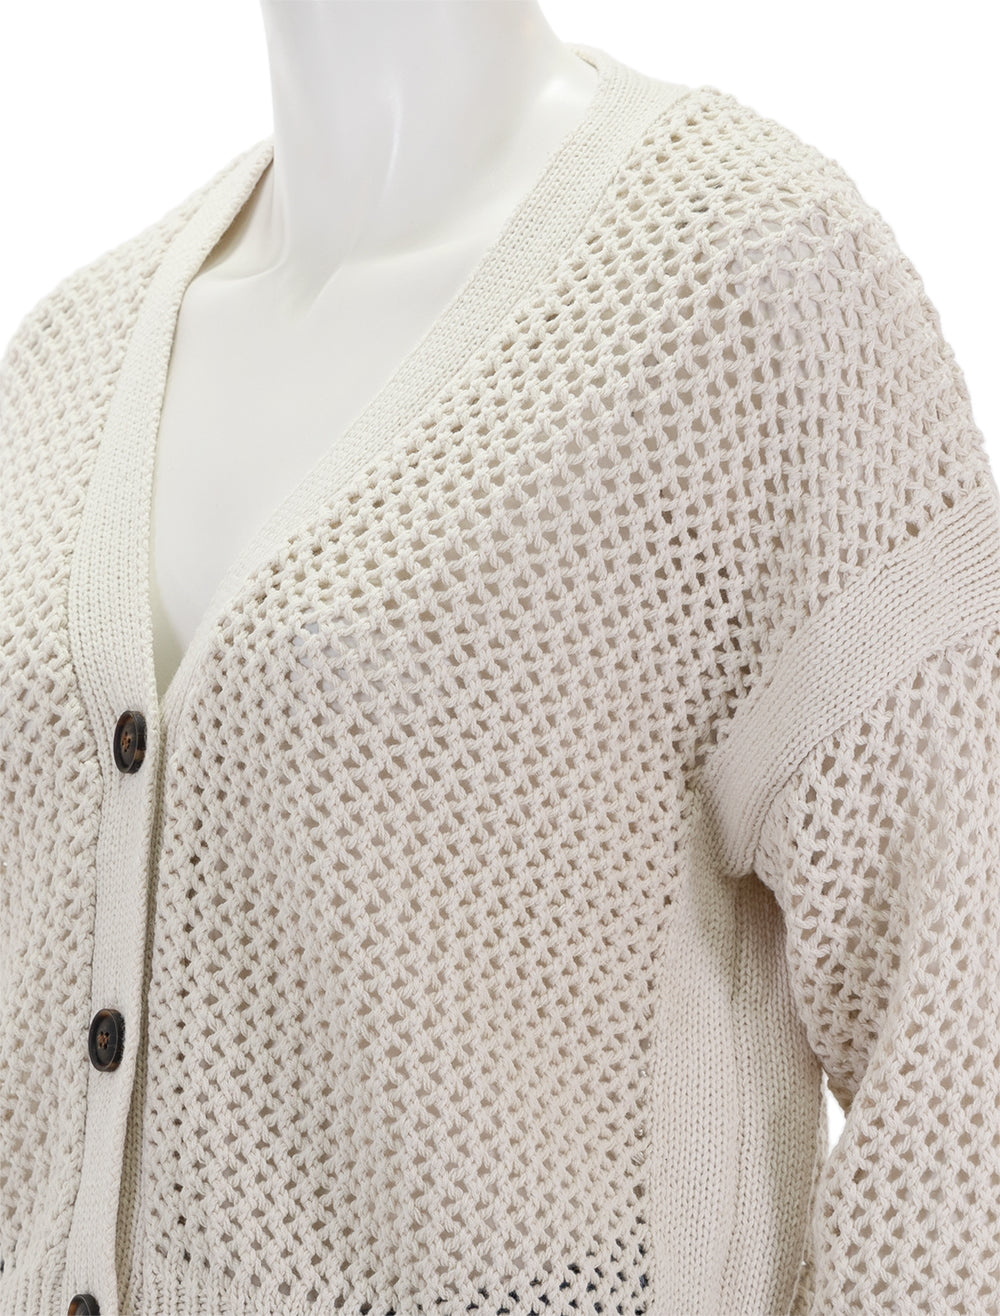 Close-up view of Self Contrast's maggie fishnet cardigan in seashell.